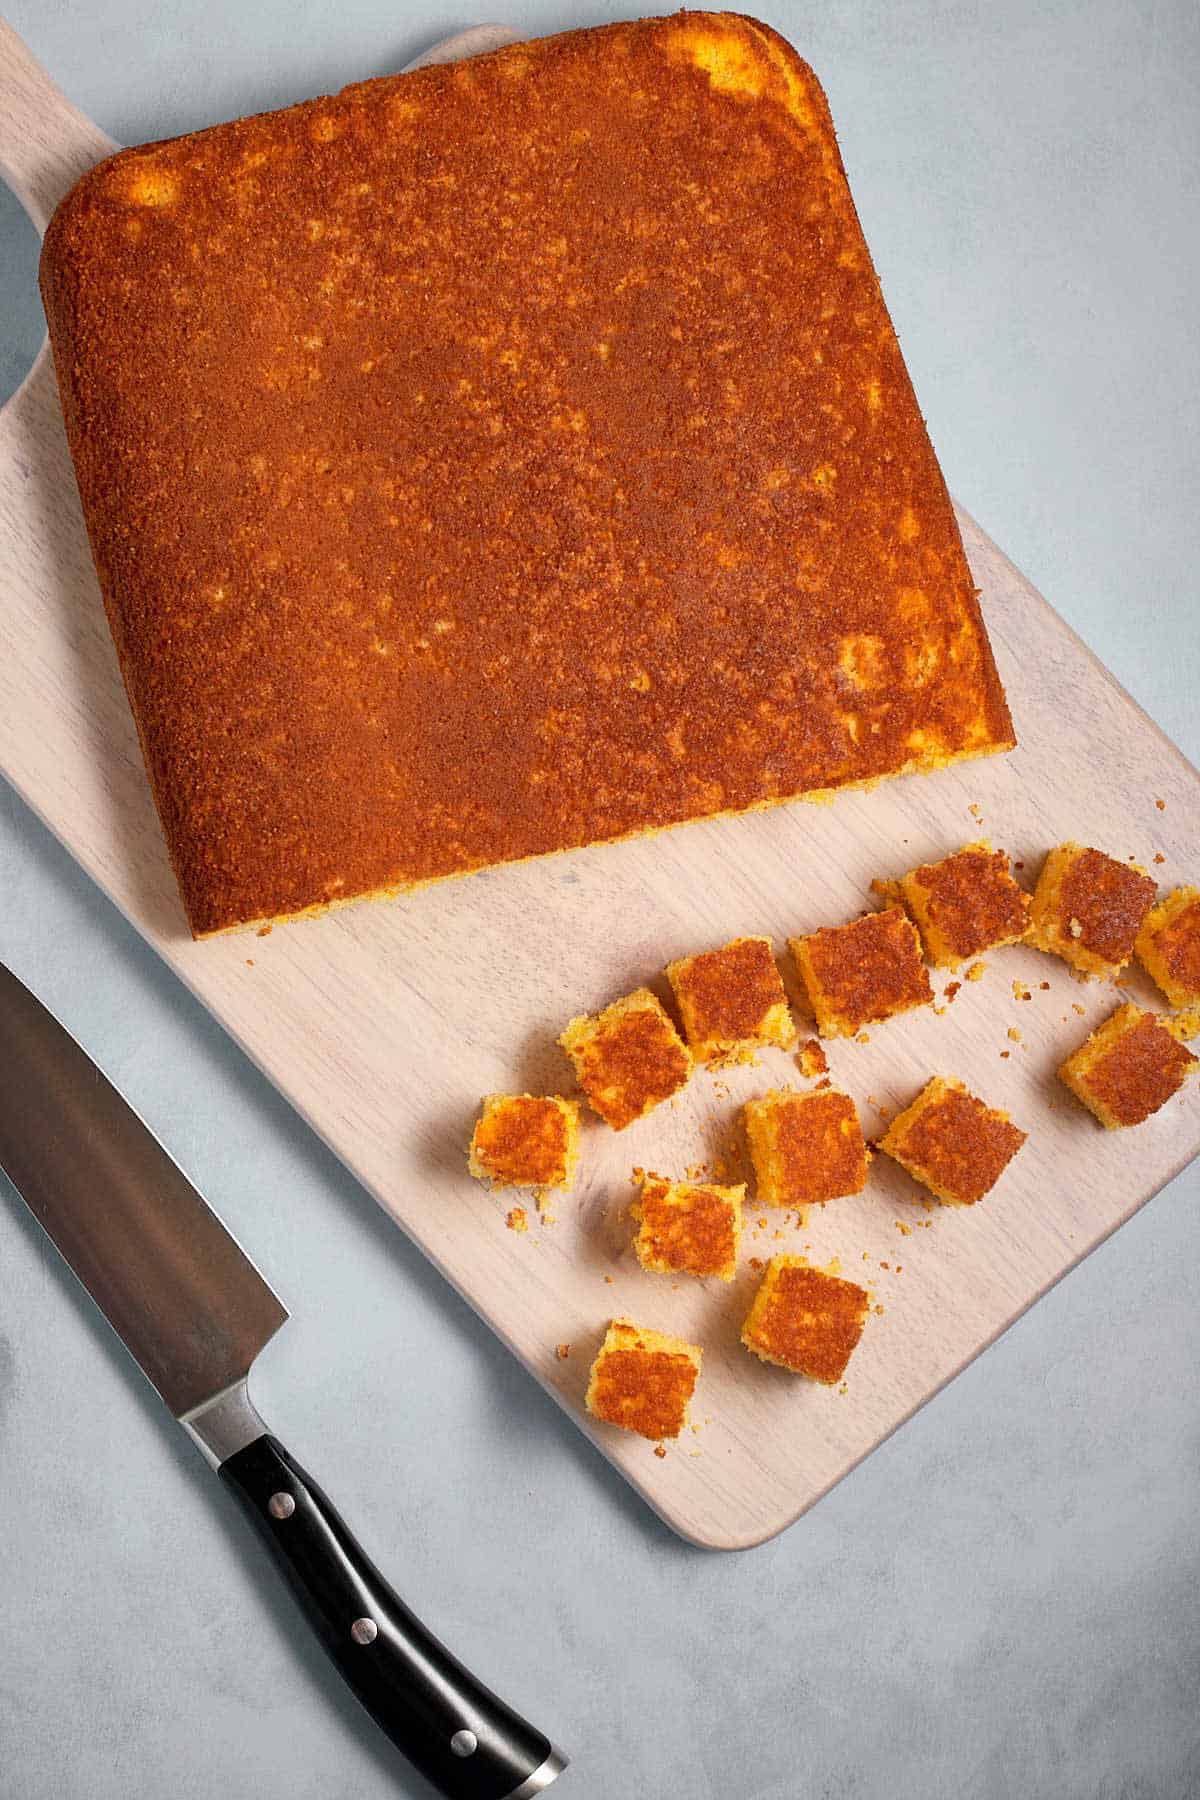 Baked cornbread being cut into cubes on a cutting board.